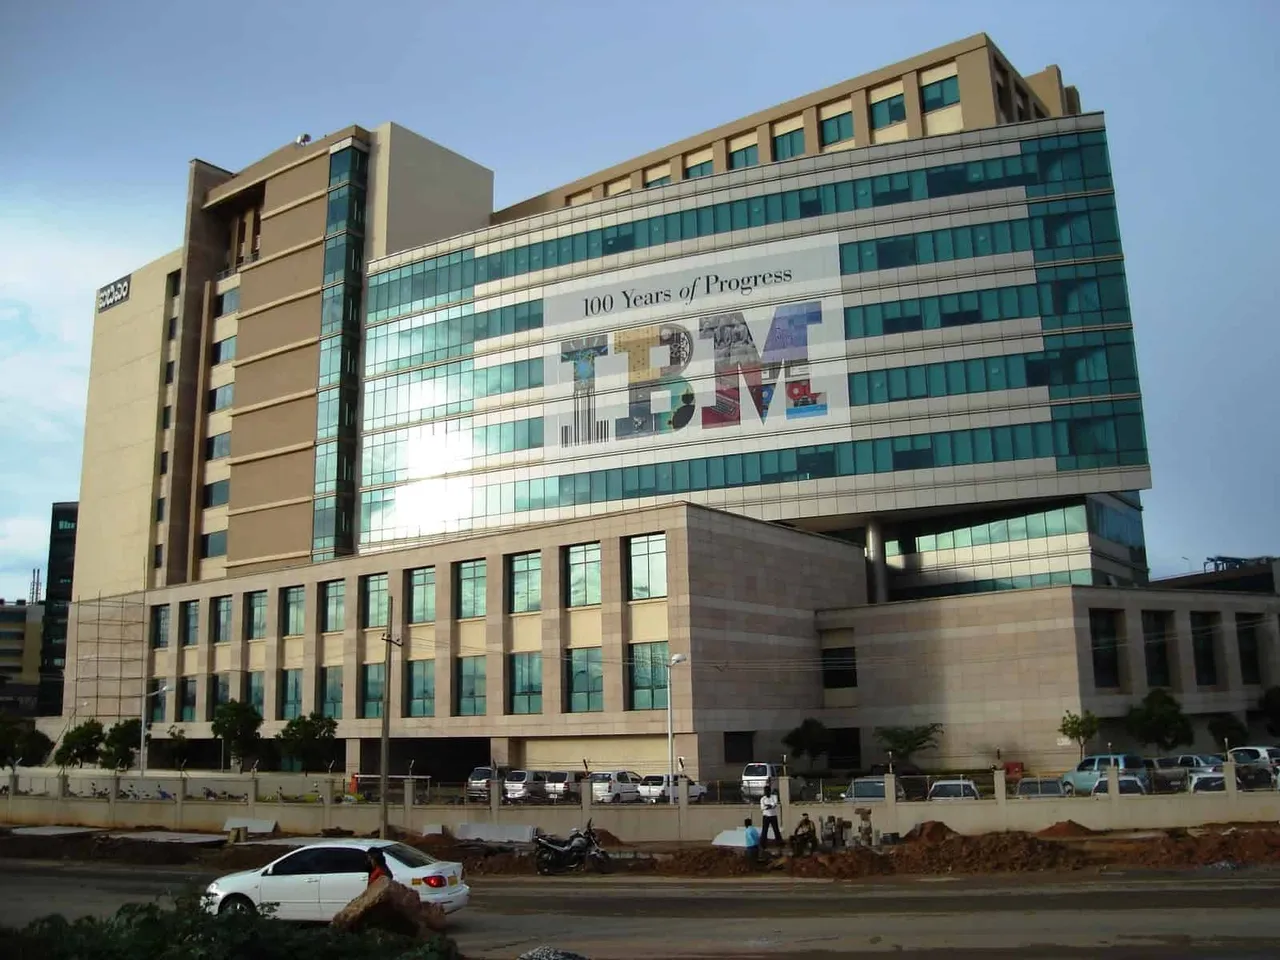 It's Cognitive Cloud as IBM’s turns 106